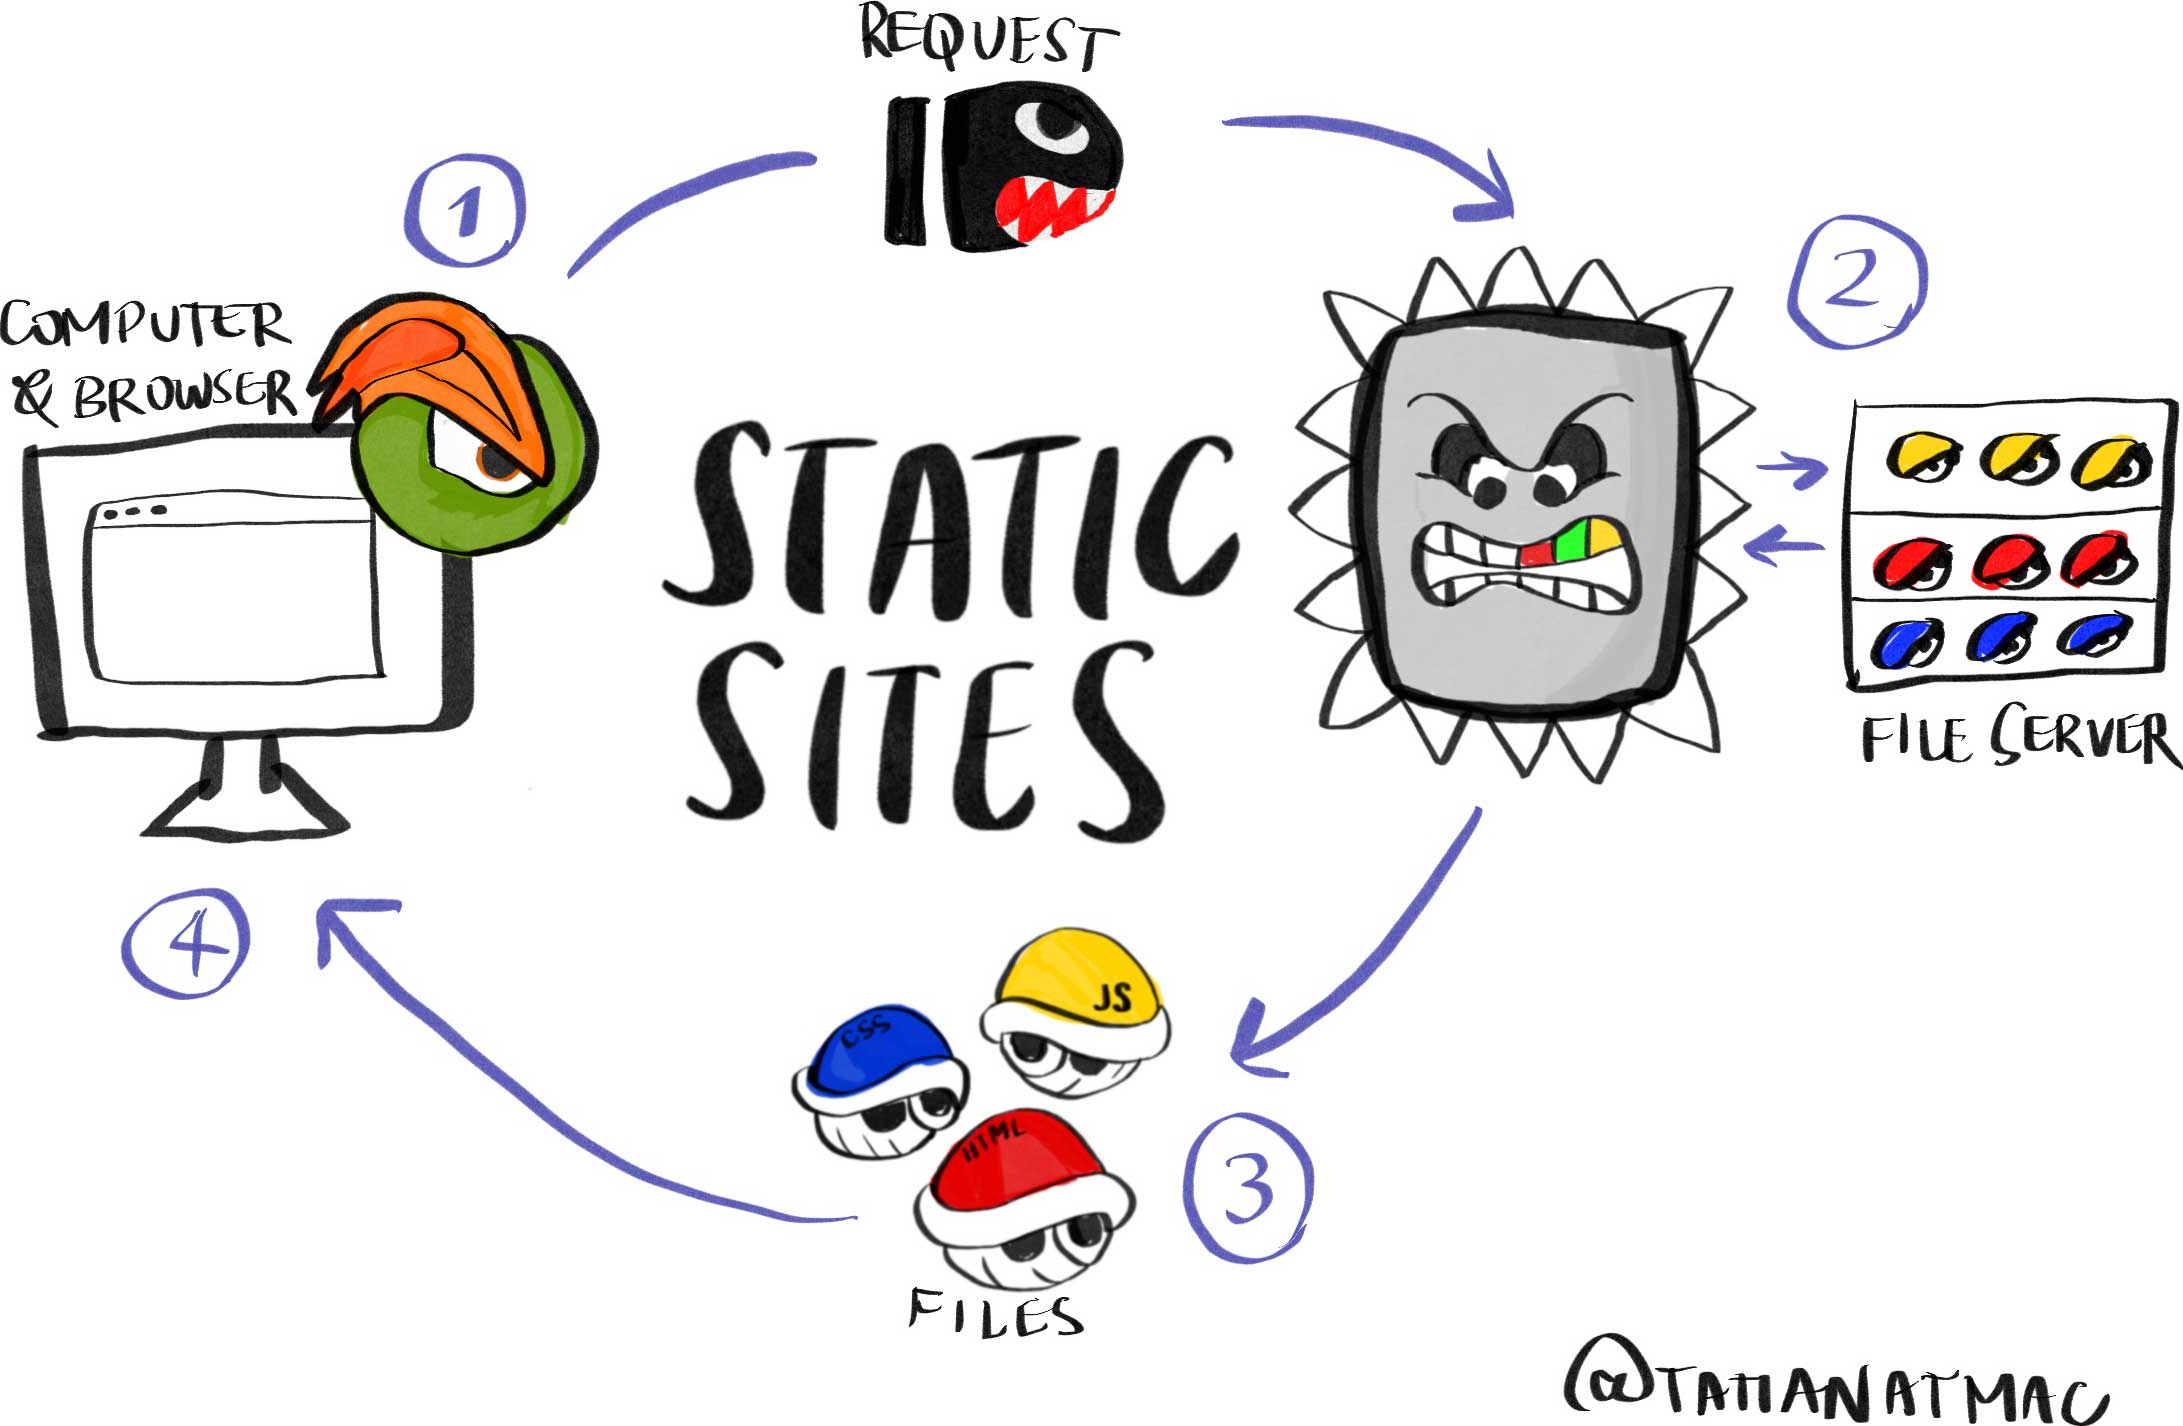 Diagram of static sites where all elements are from Super Mario to illustrate how static sites are generated. Computer and browser (browser logo is Bowser's eye and eyebrow done in Firefox/Edge style) sends a request (Bullet Bill) to the web server (Thomp), which then sends back static files (Koopas dresed as HTML, CSS, and JS files).